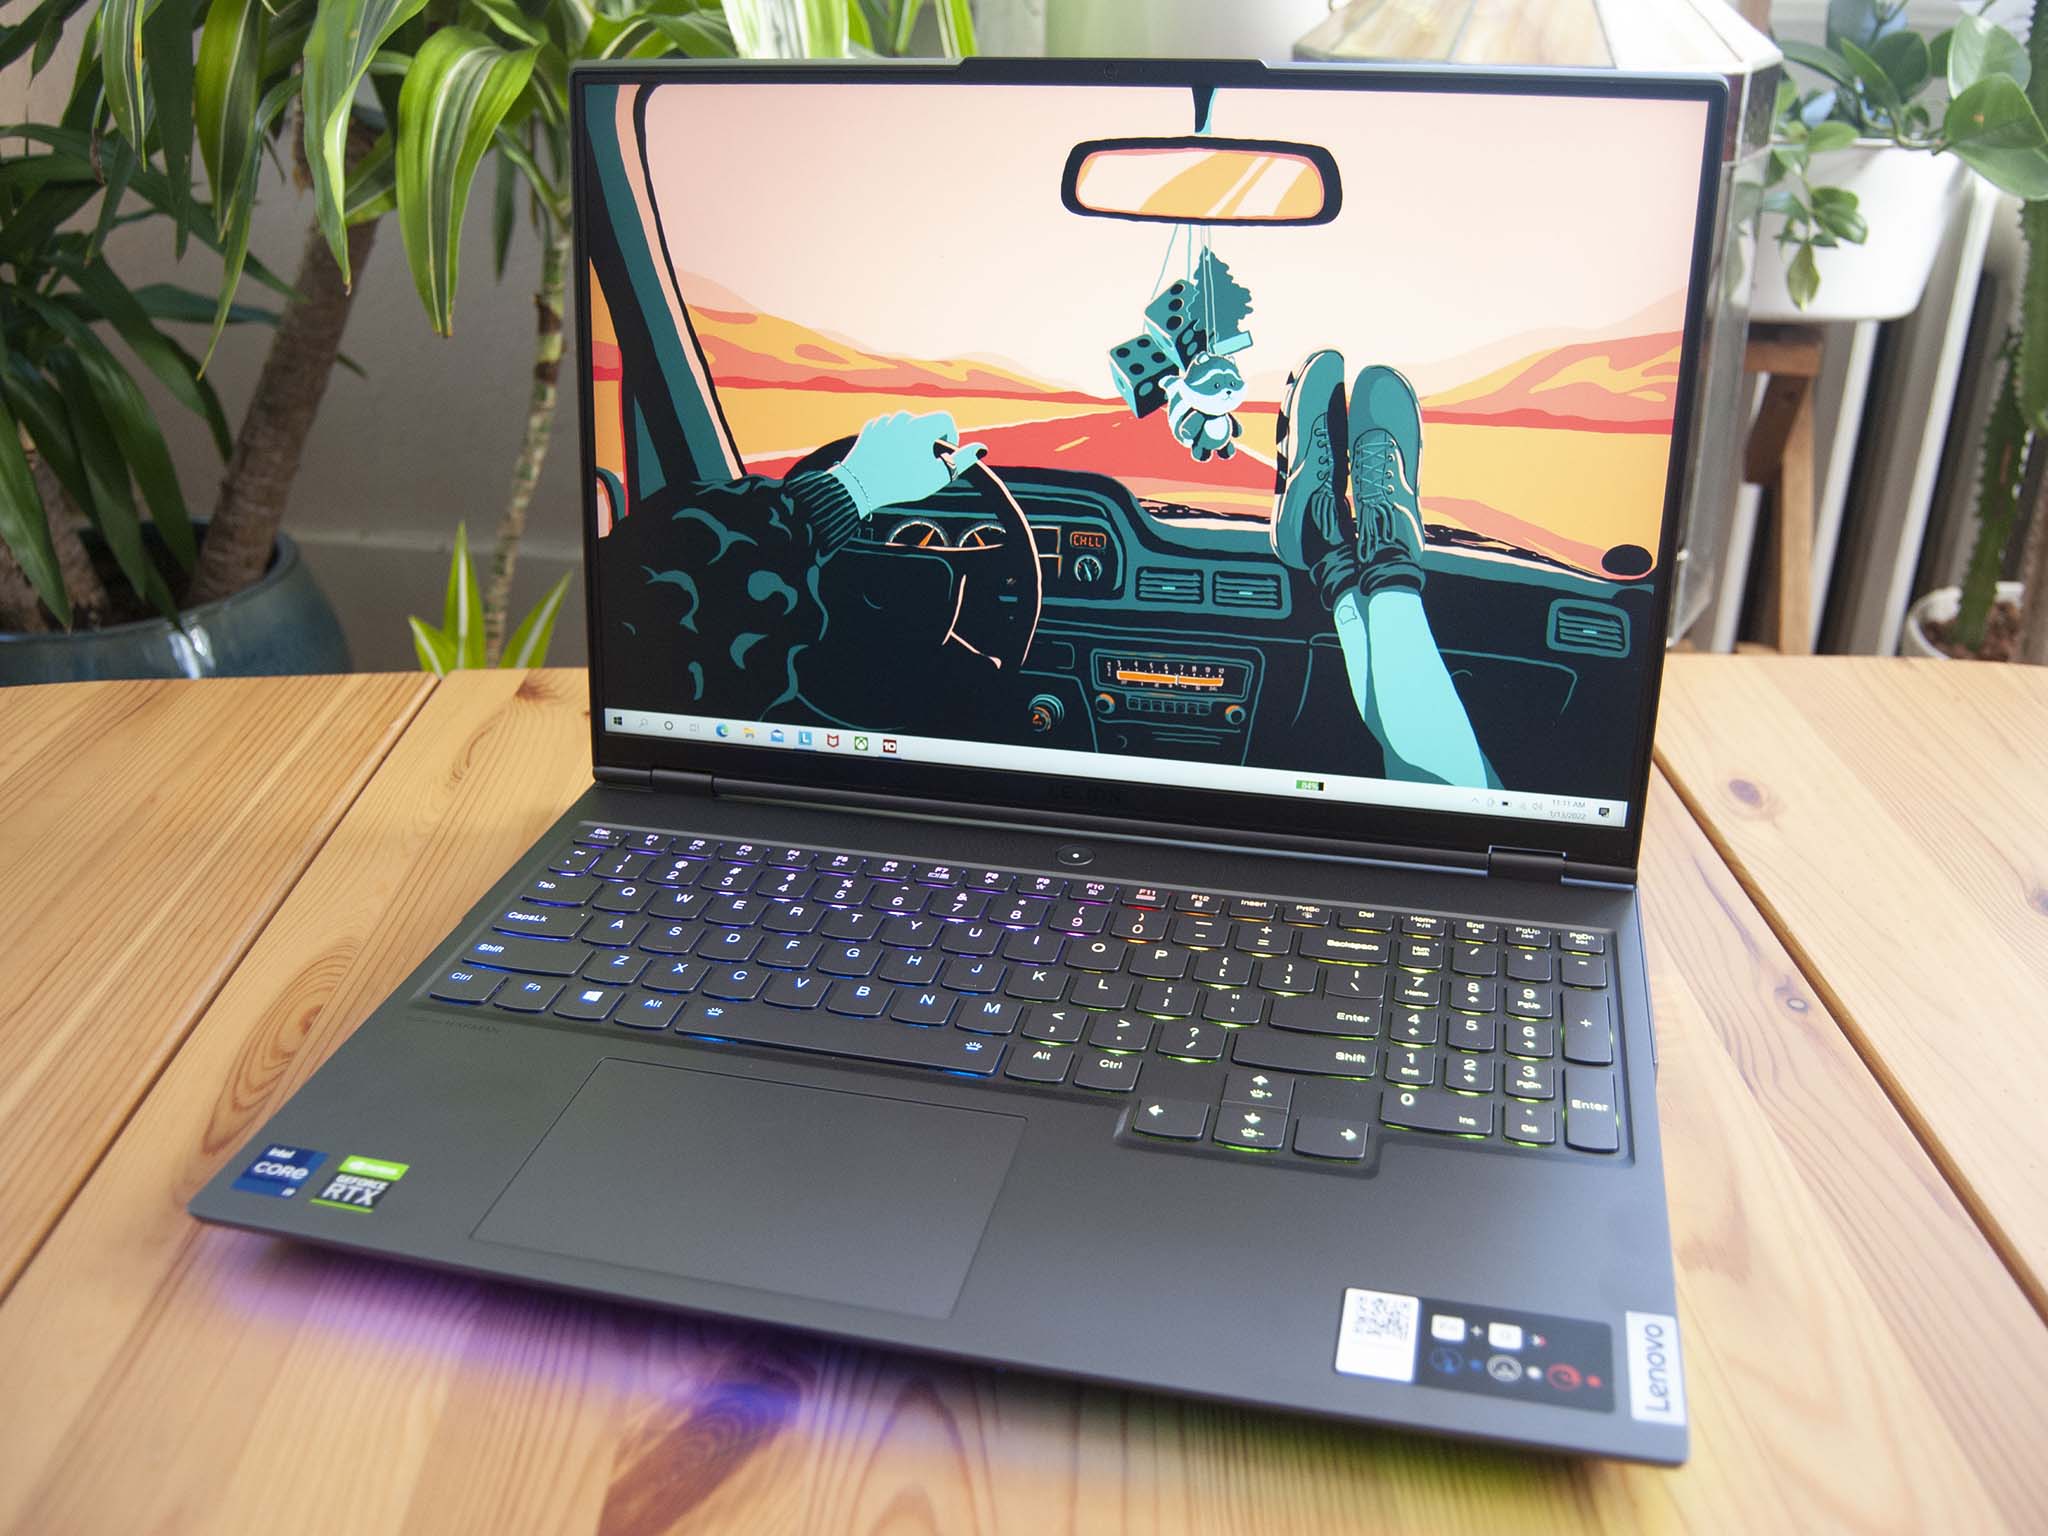 Lenovo Legion 7 (Gen 6) review: The AMD system adds battery life and costs  less, but it lacks some features